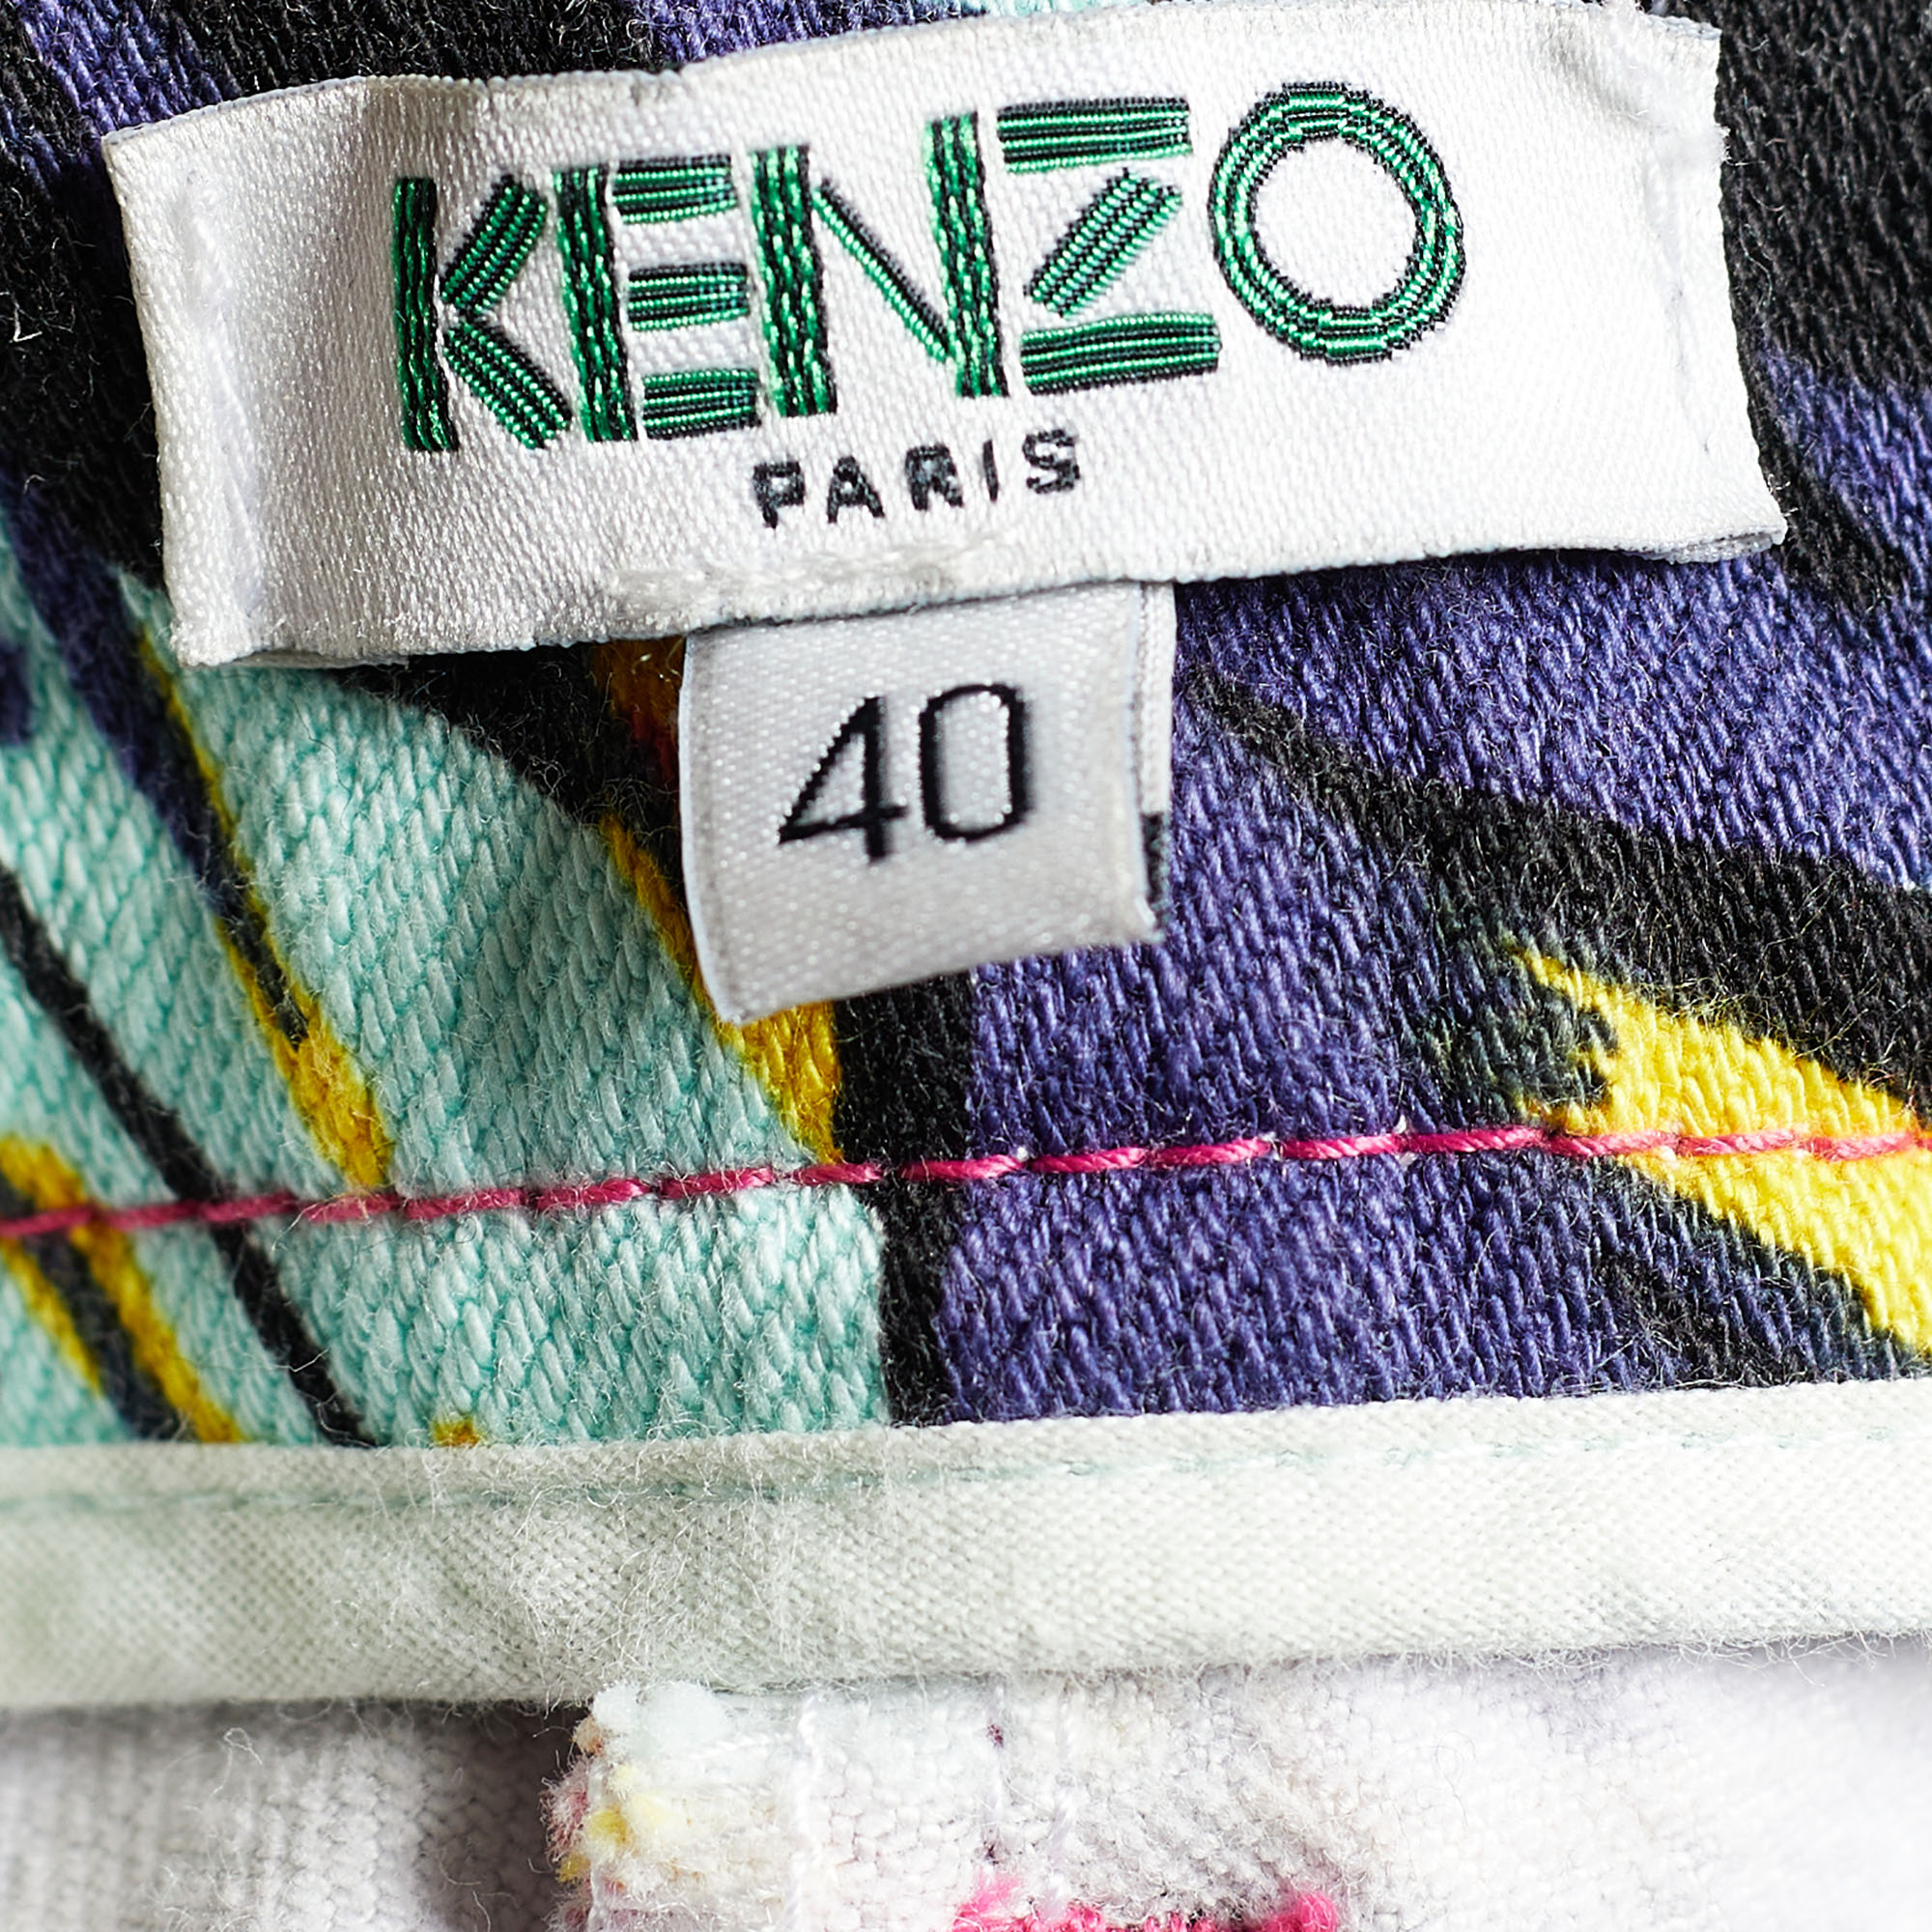 Kenzo Multicolor Printed Stretch Cotton Tapered Jeans Waist: 33